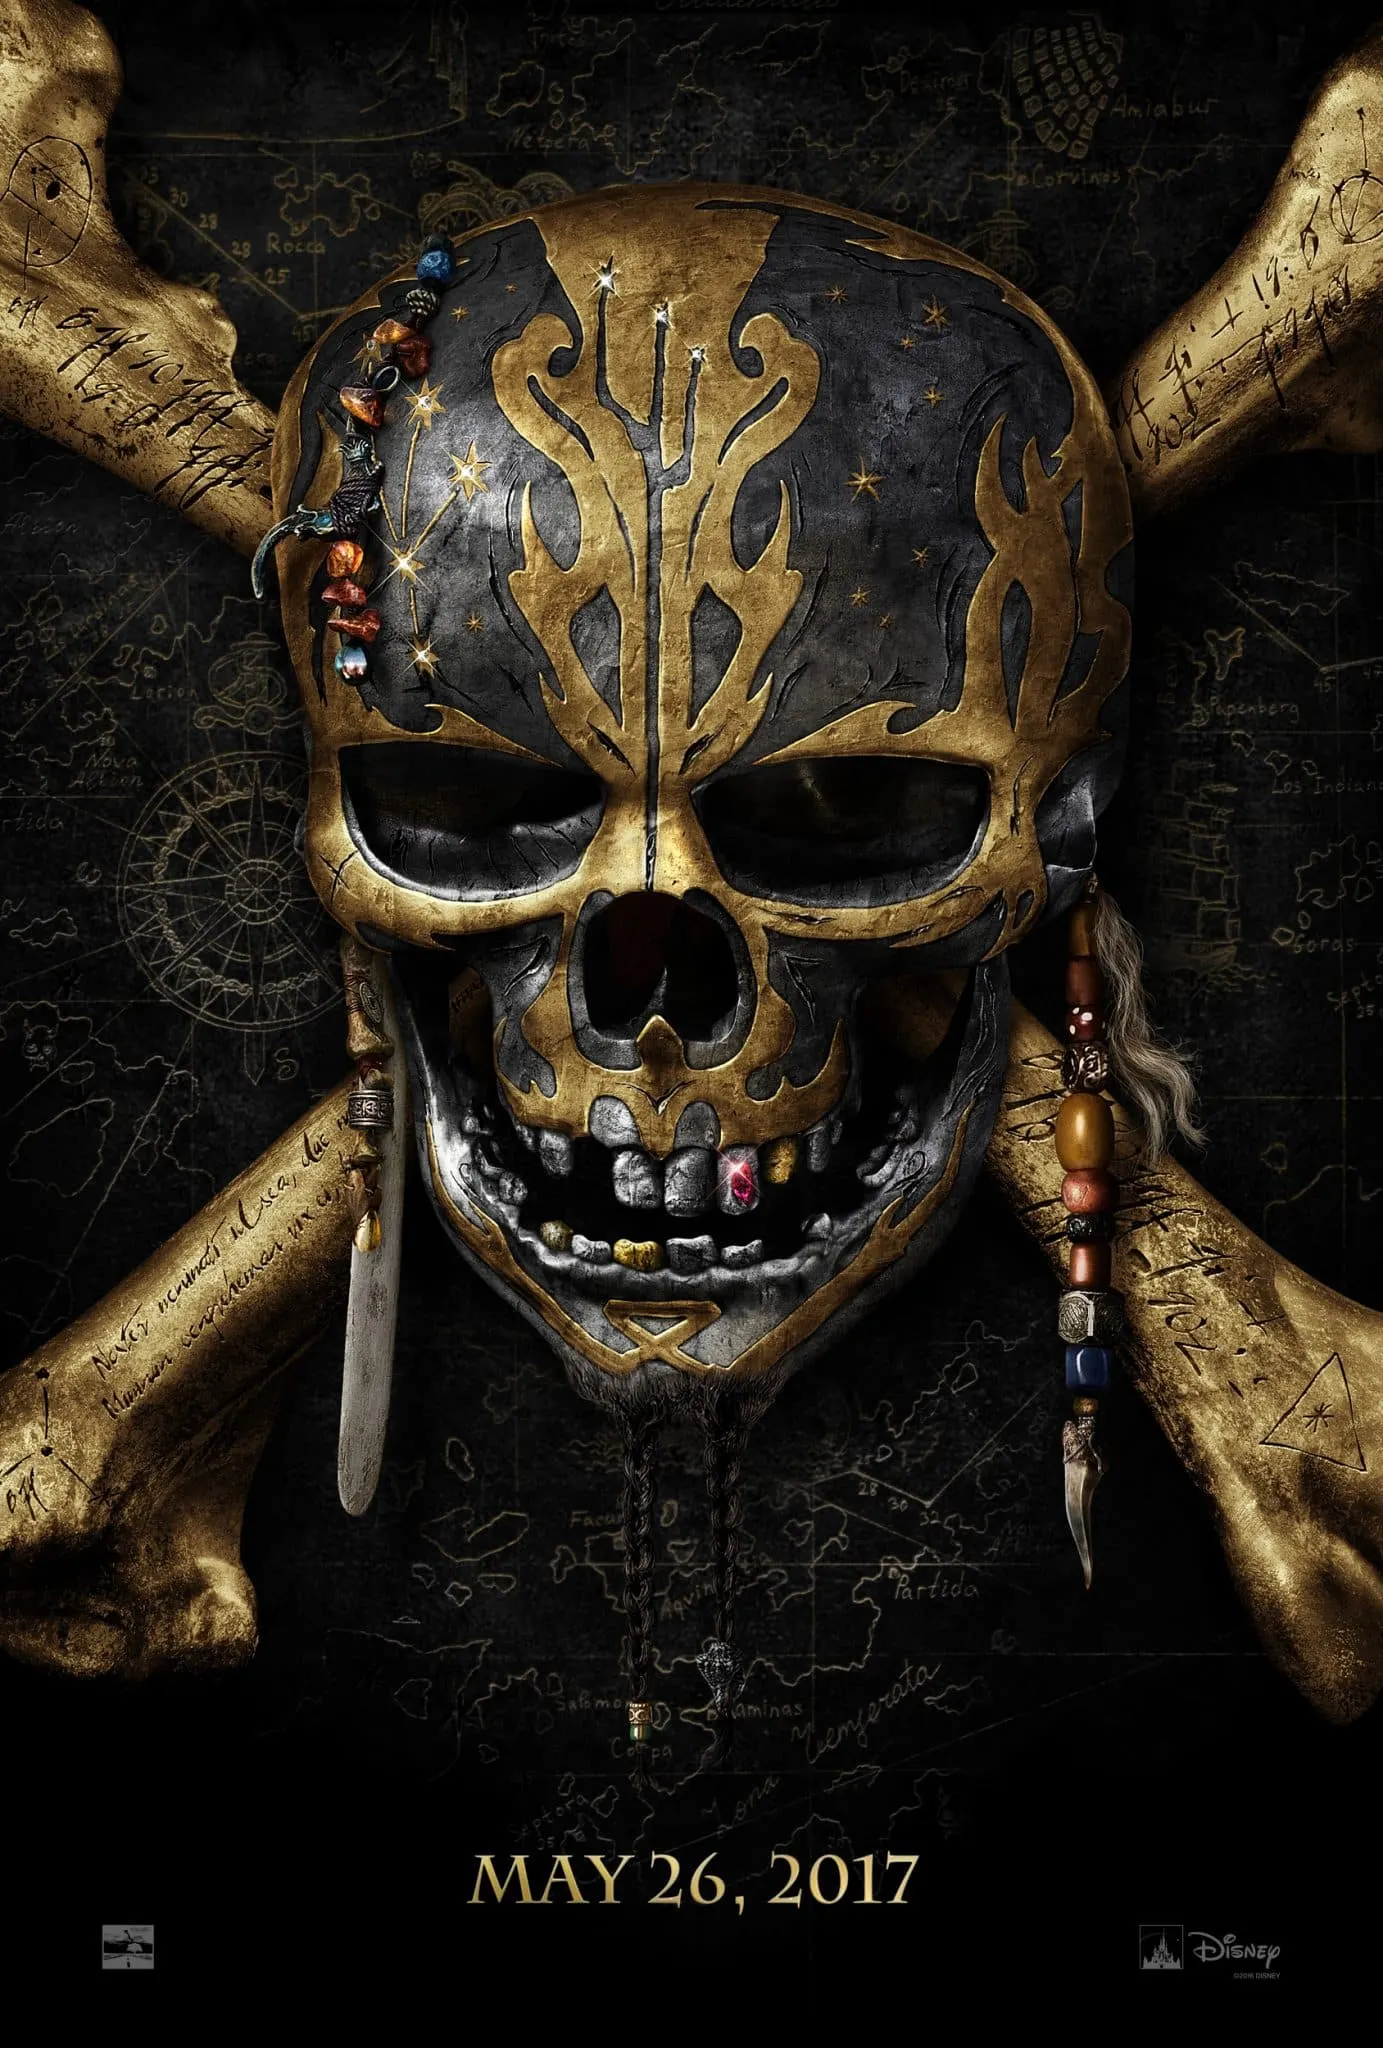 NEW Trailer for Pirates Of The Caribbean: Dead Men Tell No Tales! #APiratesDeathForMe #PiratesOfTheCaribbean | ThisNThatwithOlivia.com